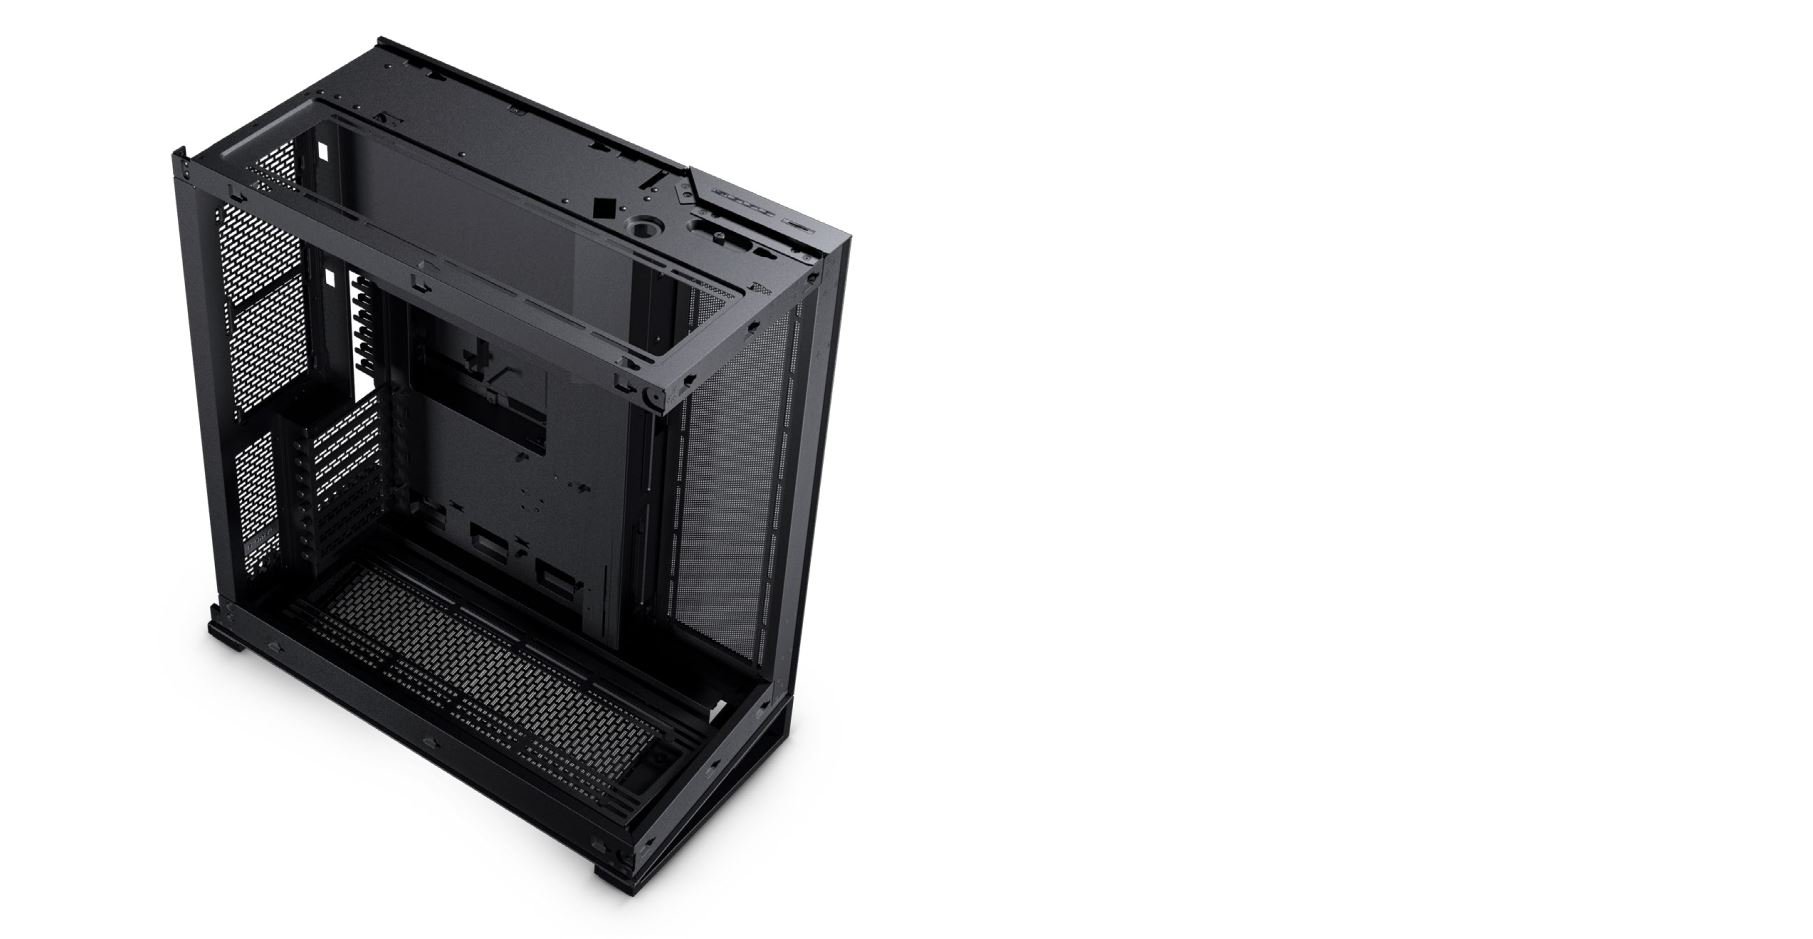 Phanteks (PH-NV723TG_DMW01) NV7 Showcase Full-Tower Chassis, High Airflow  Performance, Integrated D/A-RGB Lighting, Seamless Tempered Glass Design,  12